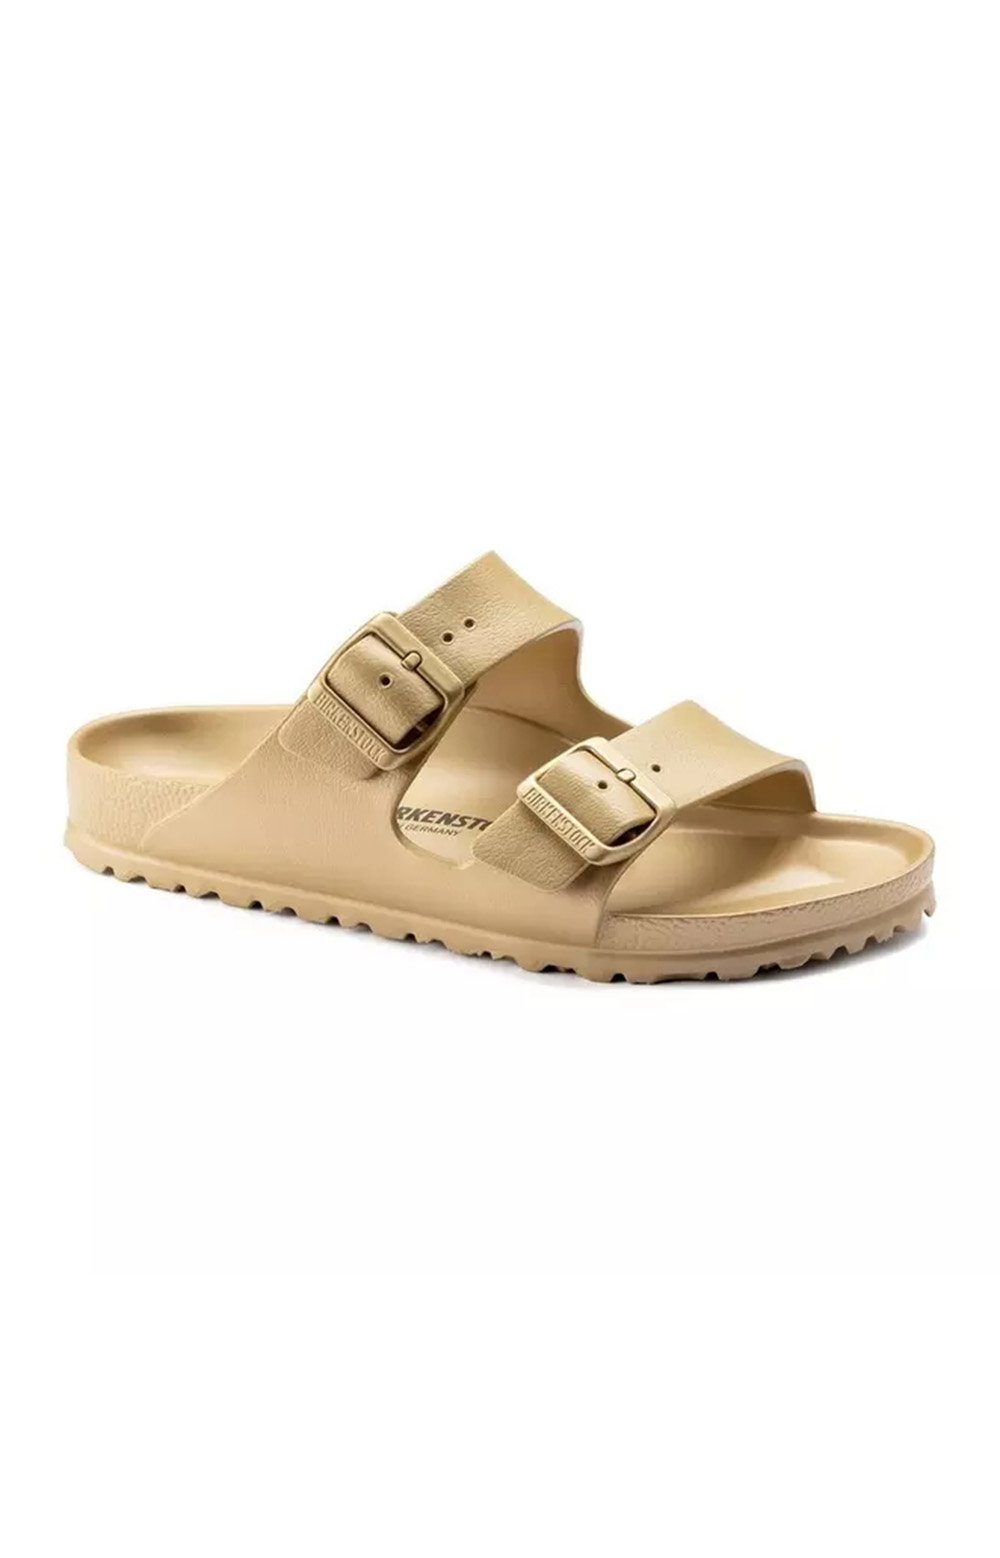 Arizona Eva Sandals Gold - Women's stylish and comfortable gold sandals for summer 